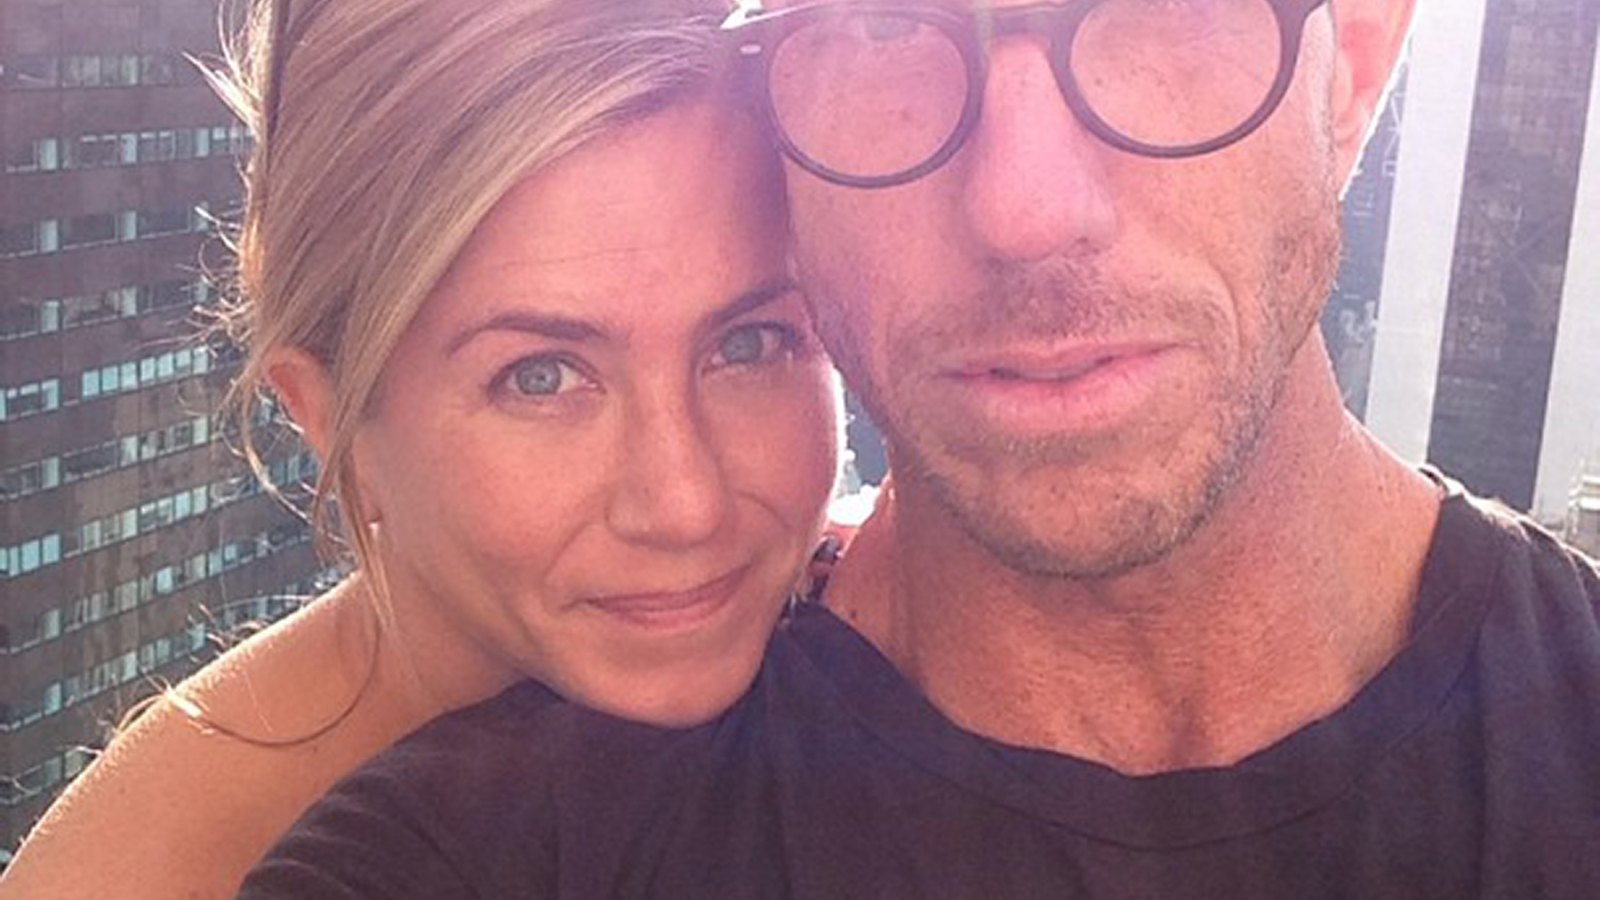 Jennifer Aniston No Makeup Star Goes Fresh Faced in New Pic